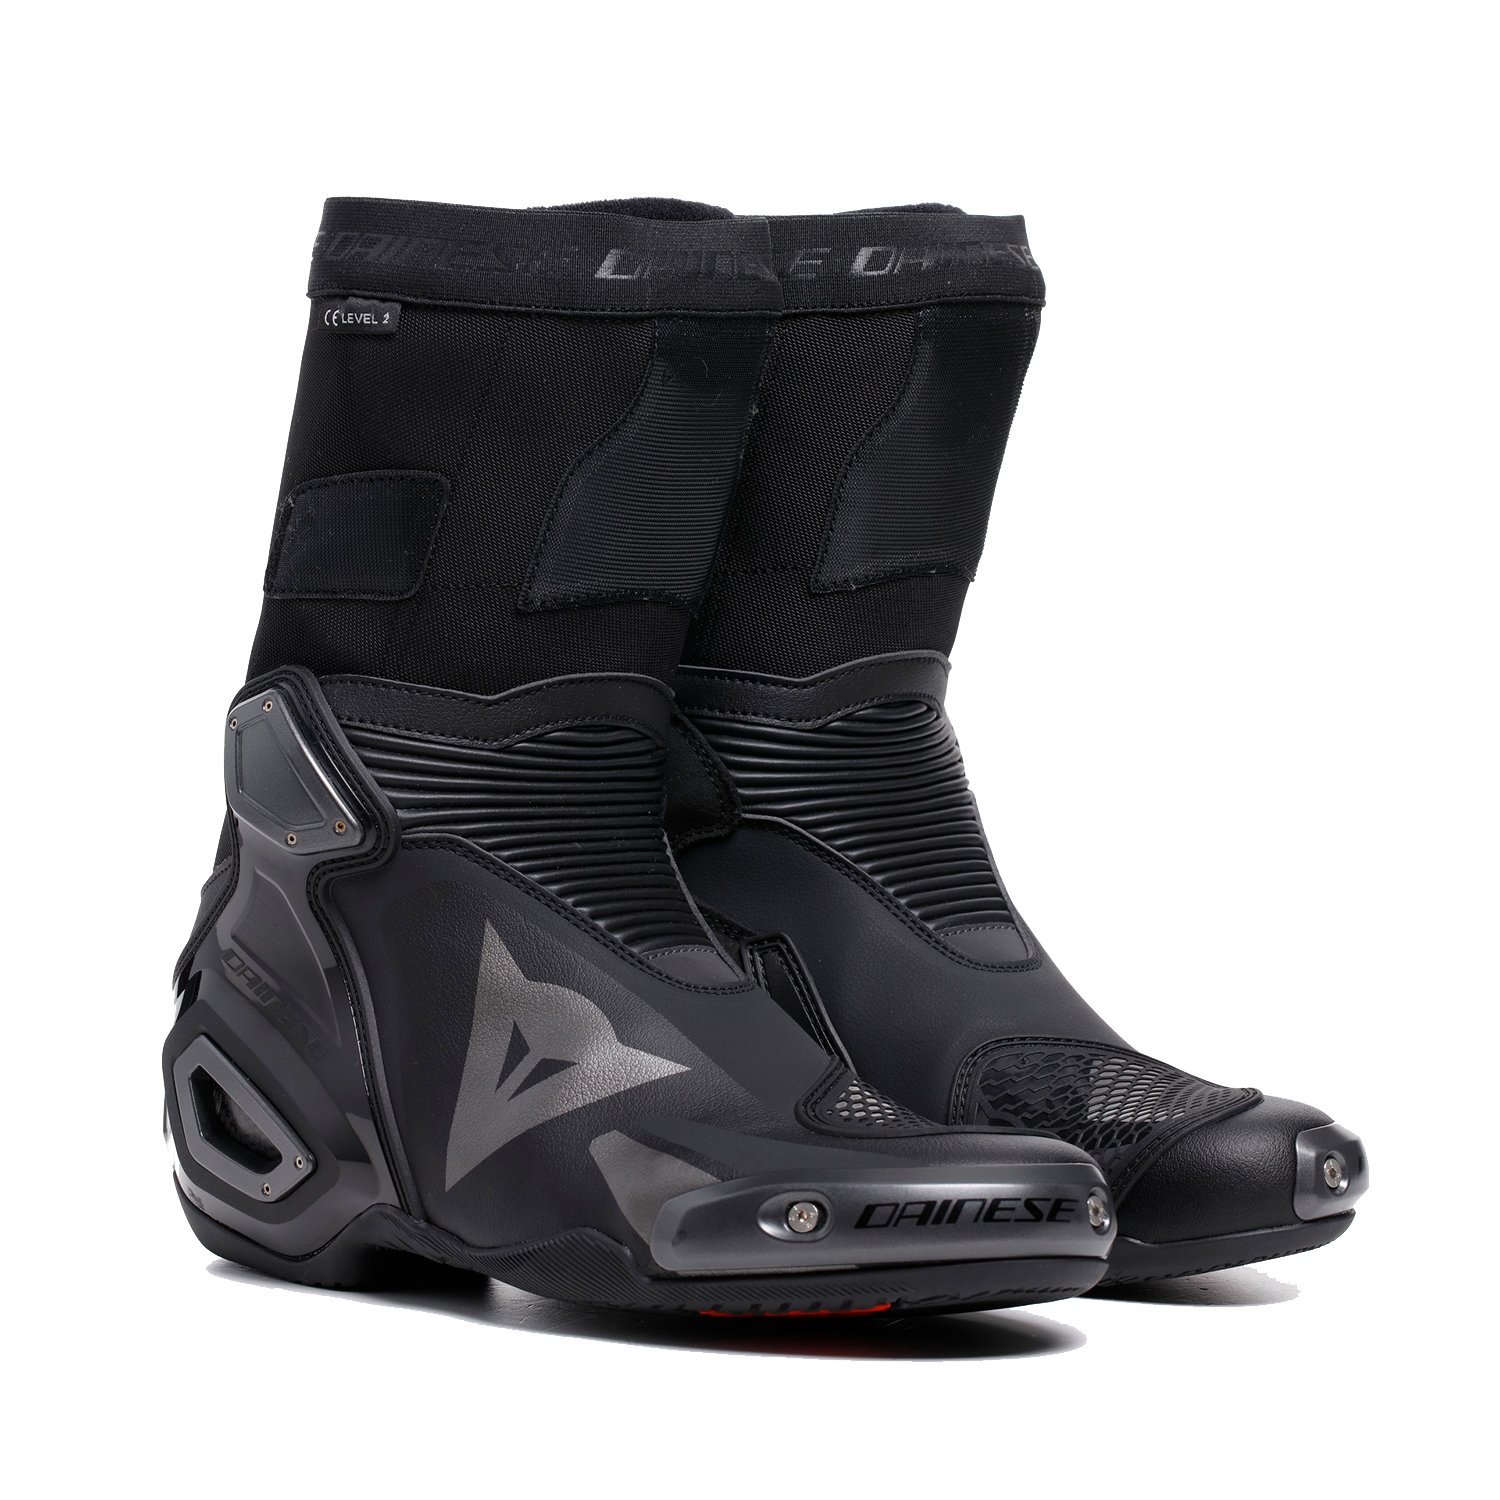 Image of Dainese Axial 2 Boots Black Size 41 ID 8051019739643